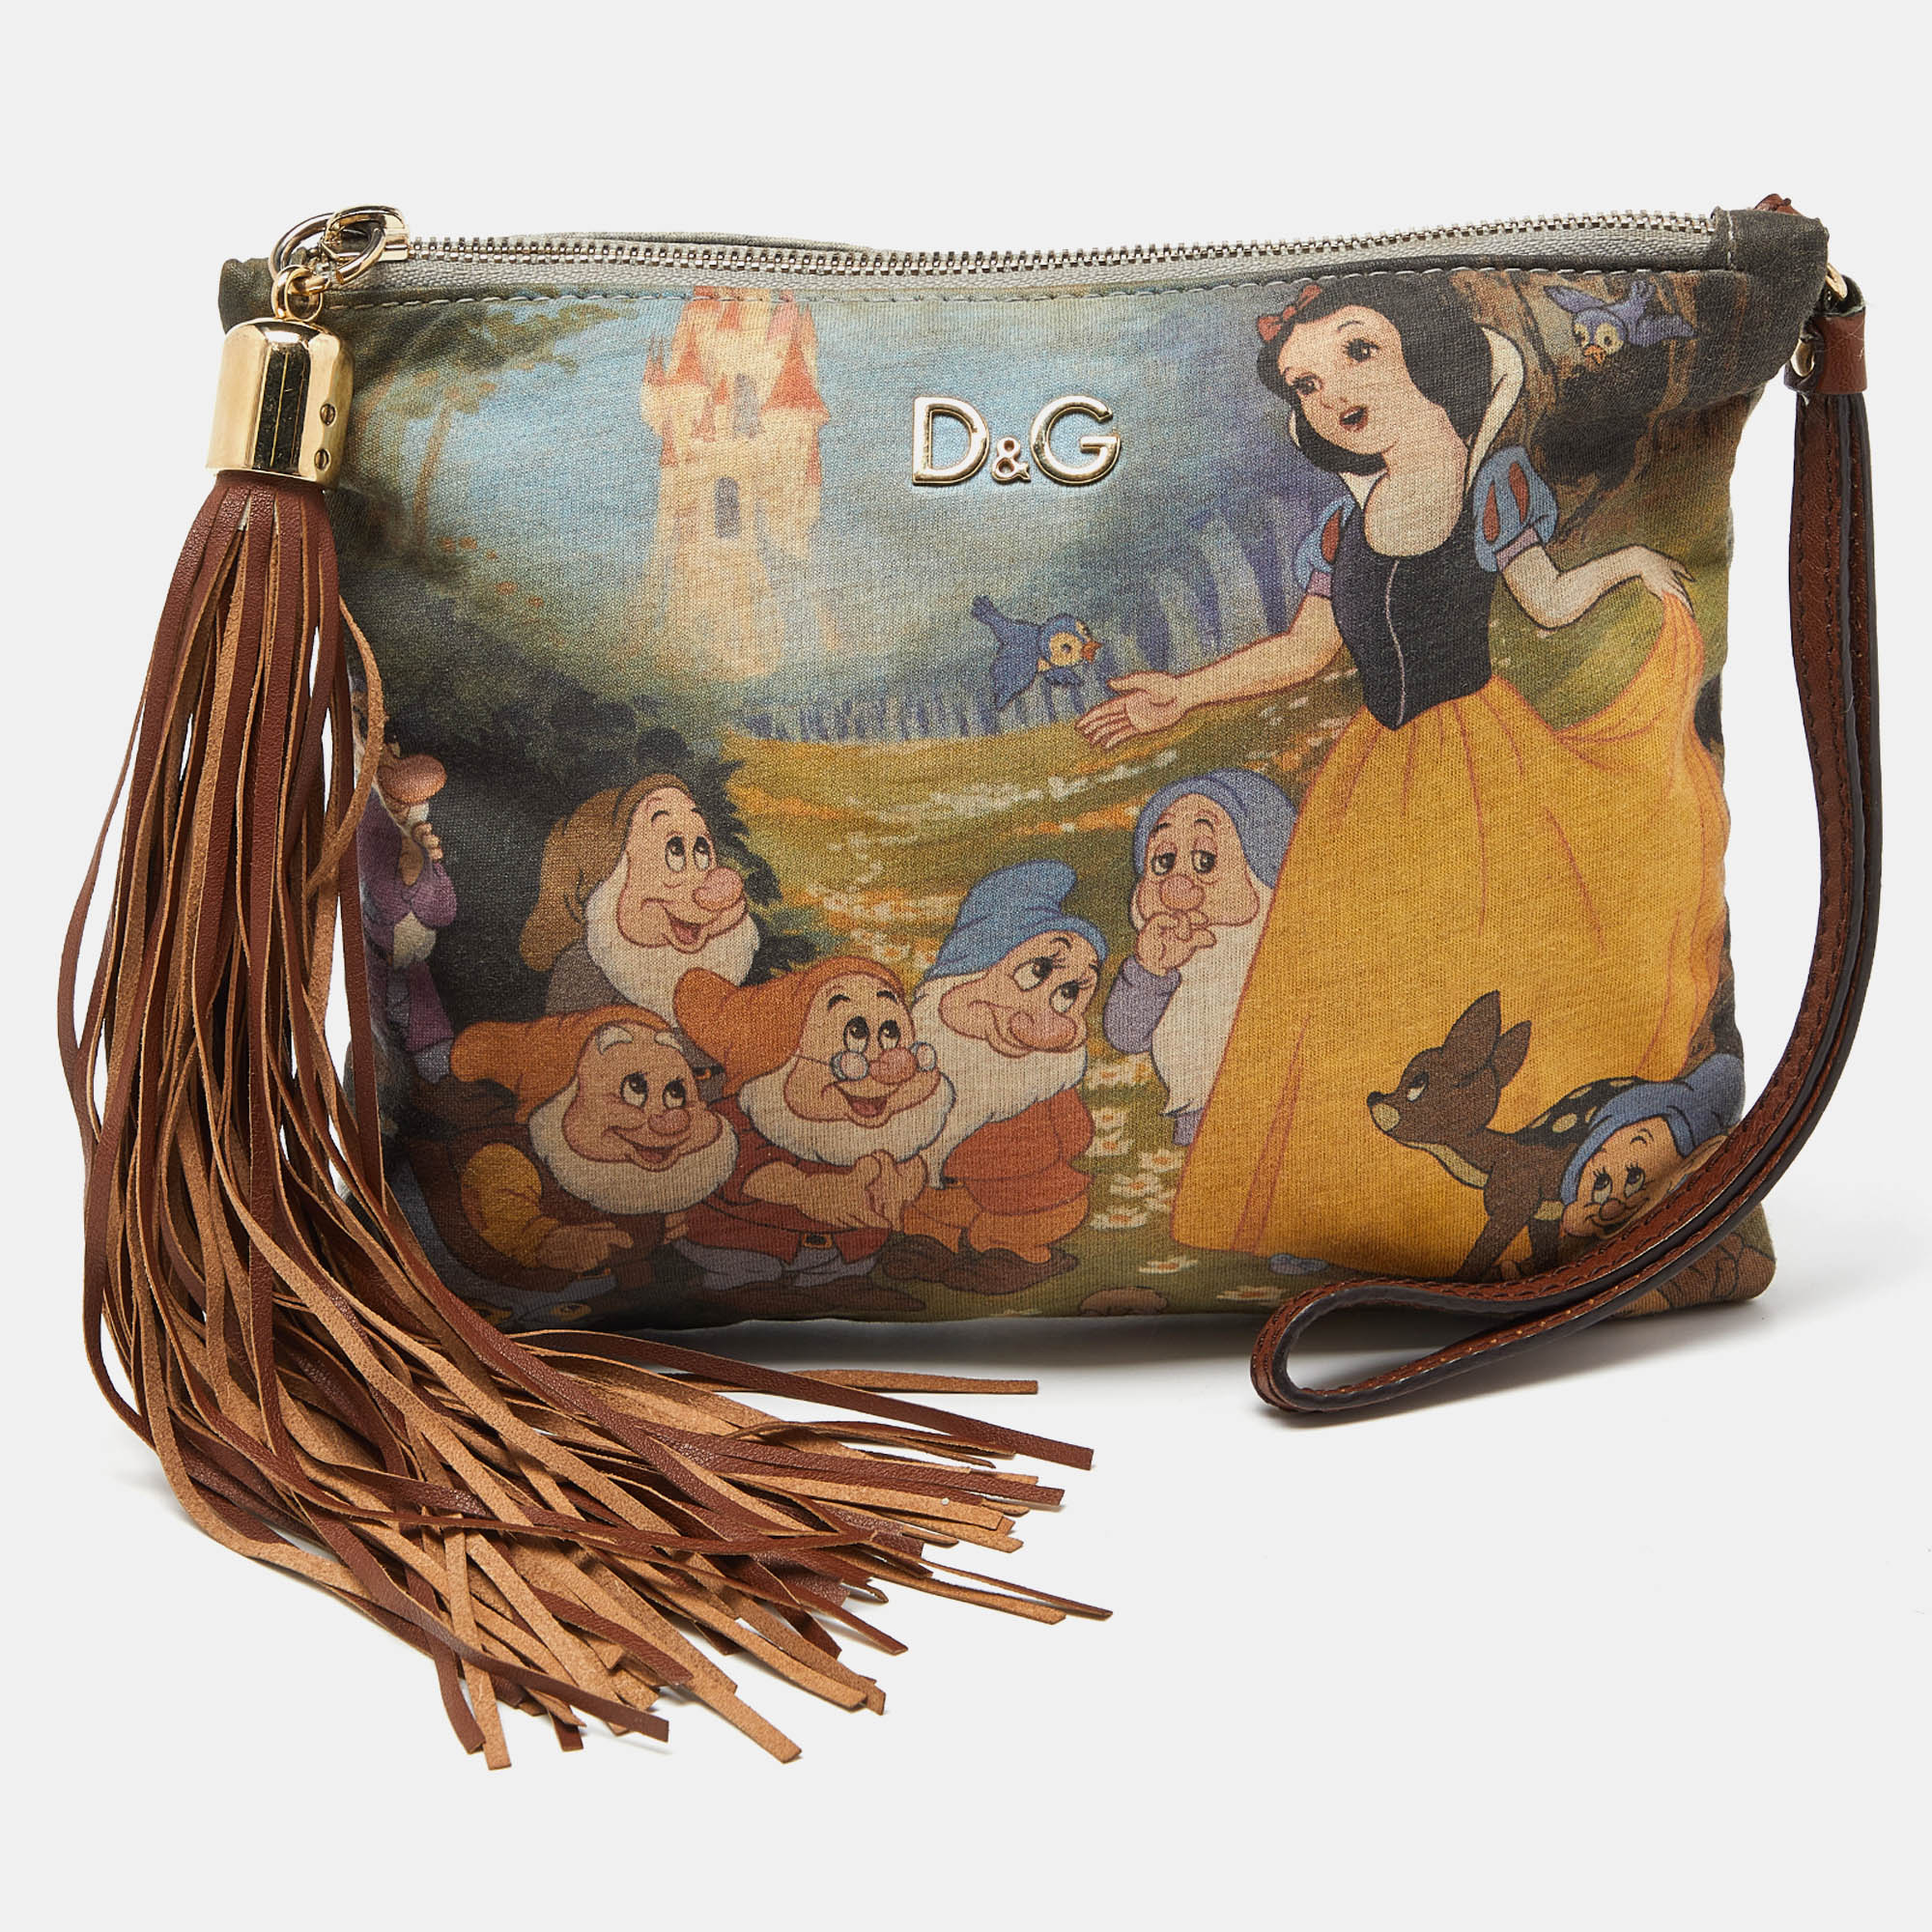 Dolce & gabbana d&g multicolor fabric and leather ania disney wristlet pouch